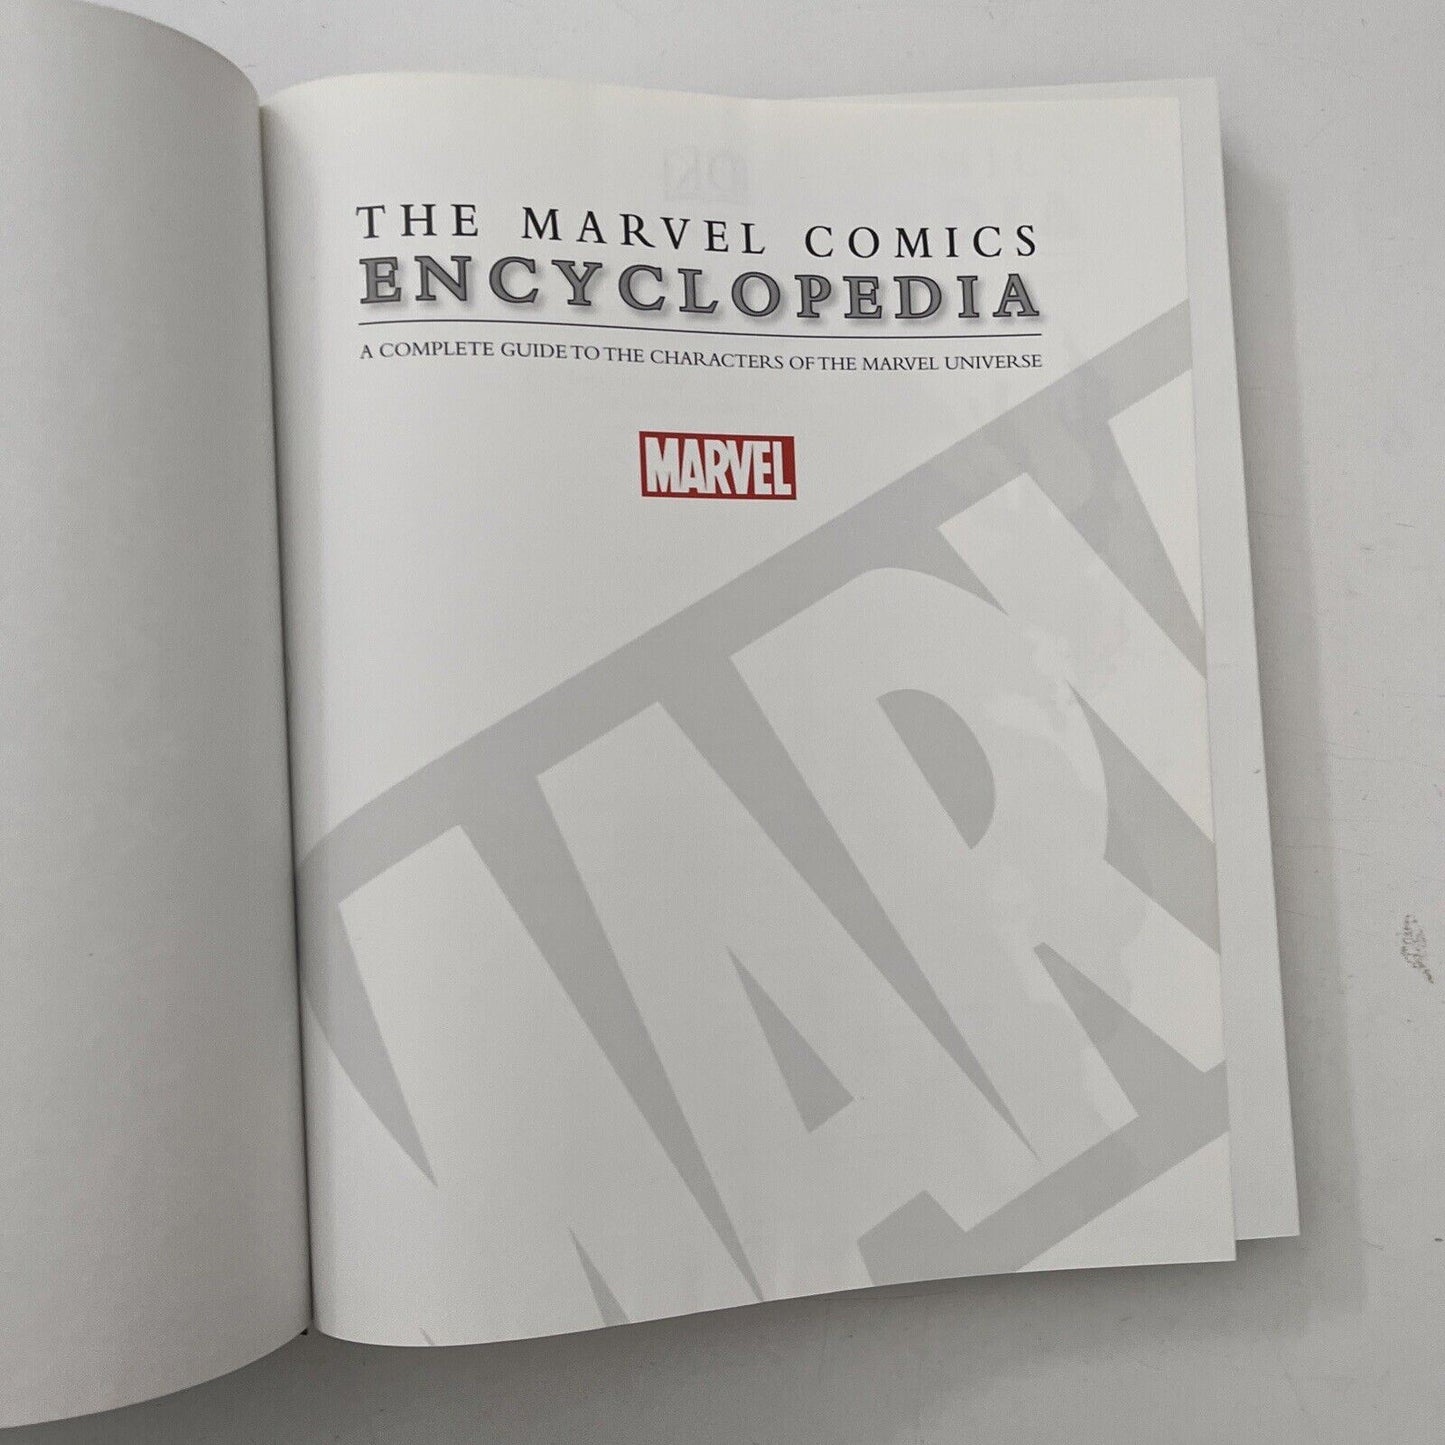 The Marvel Comics Encyclopedia: A Complete Guide to the Characters of the Marvel